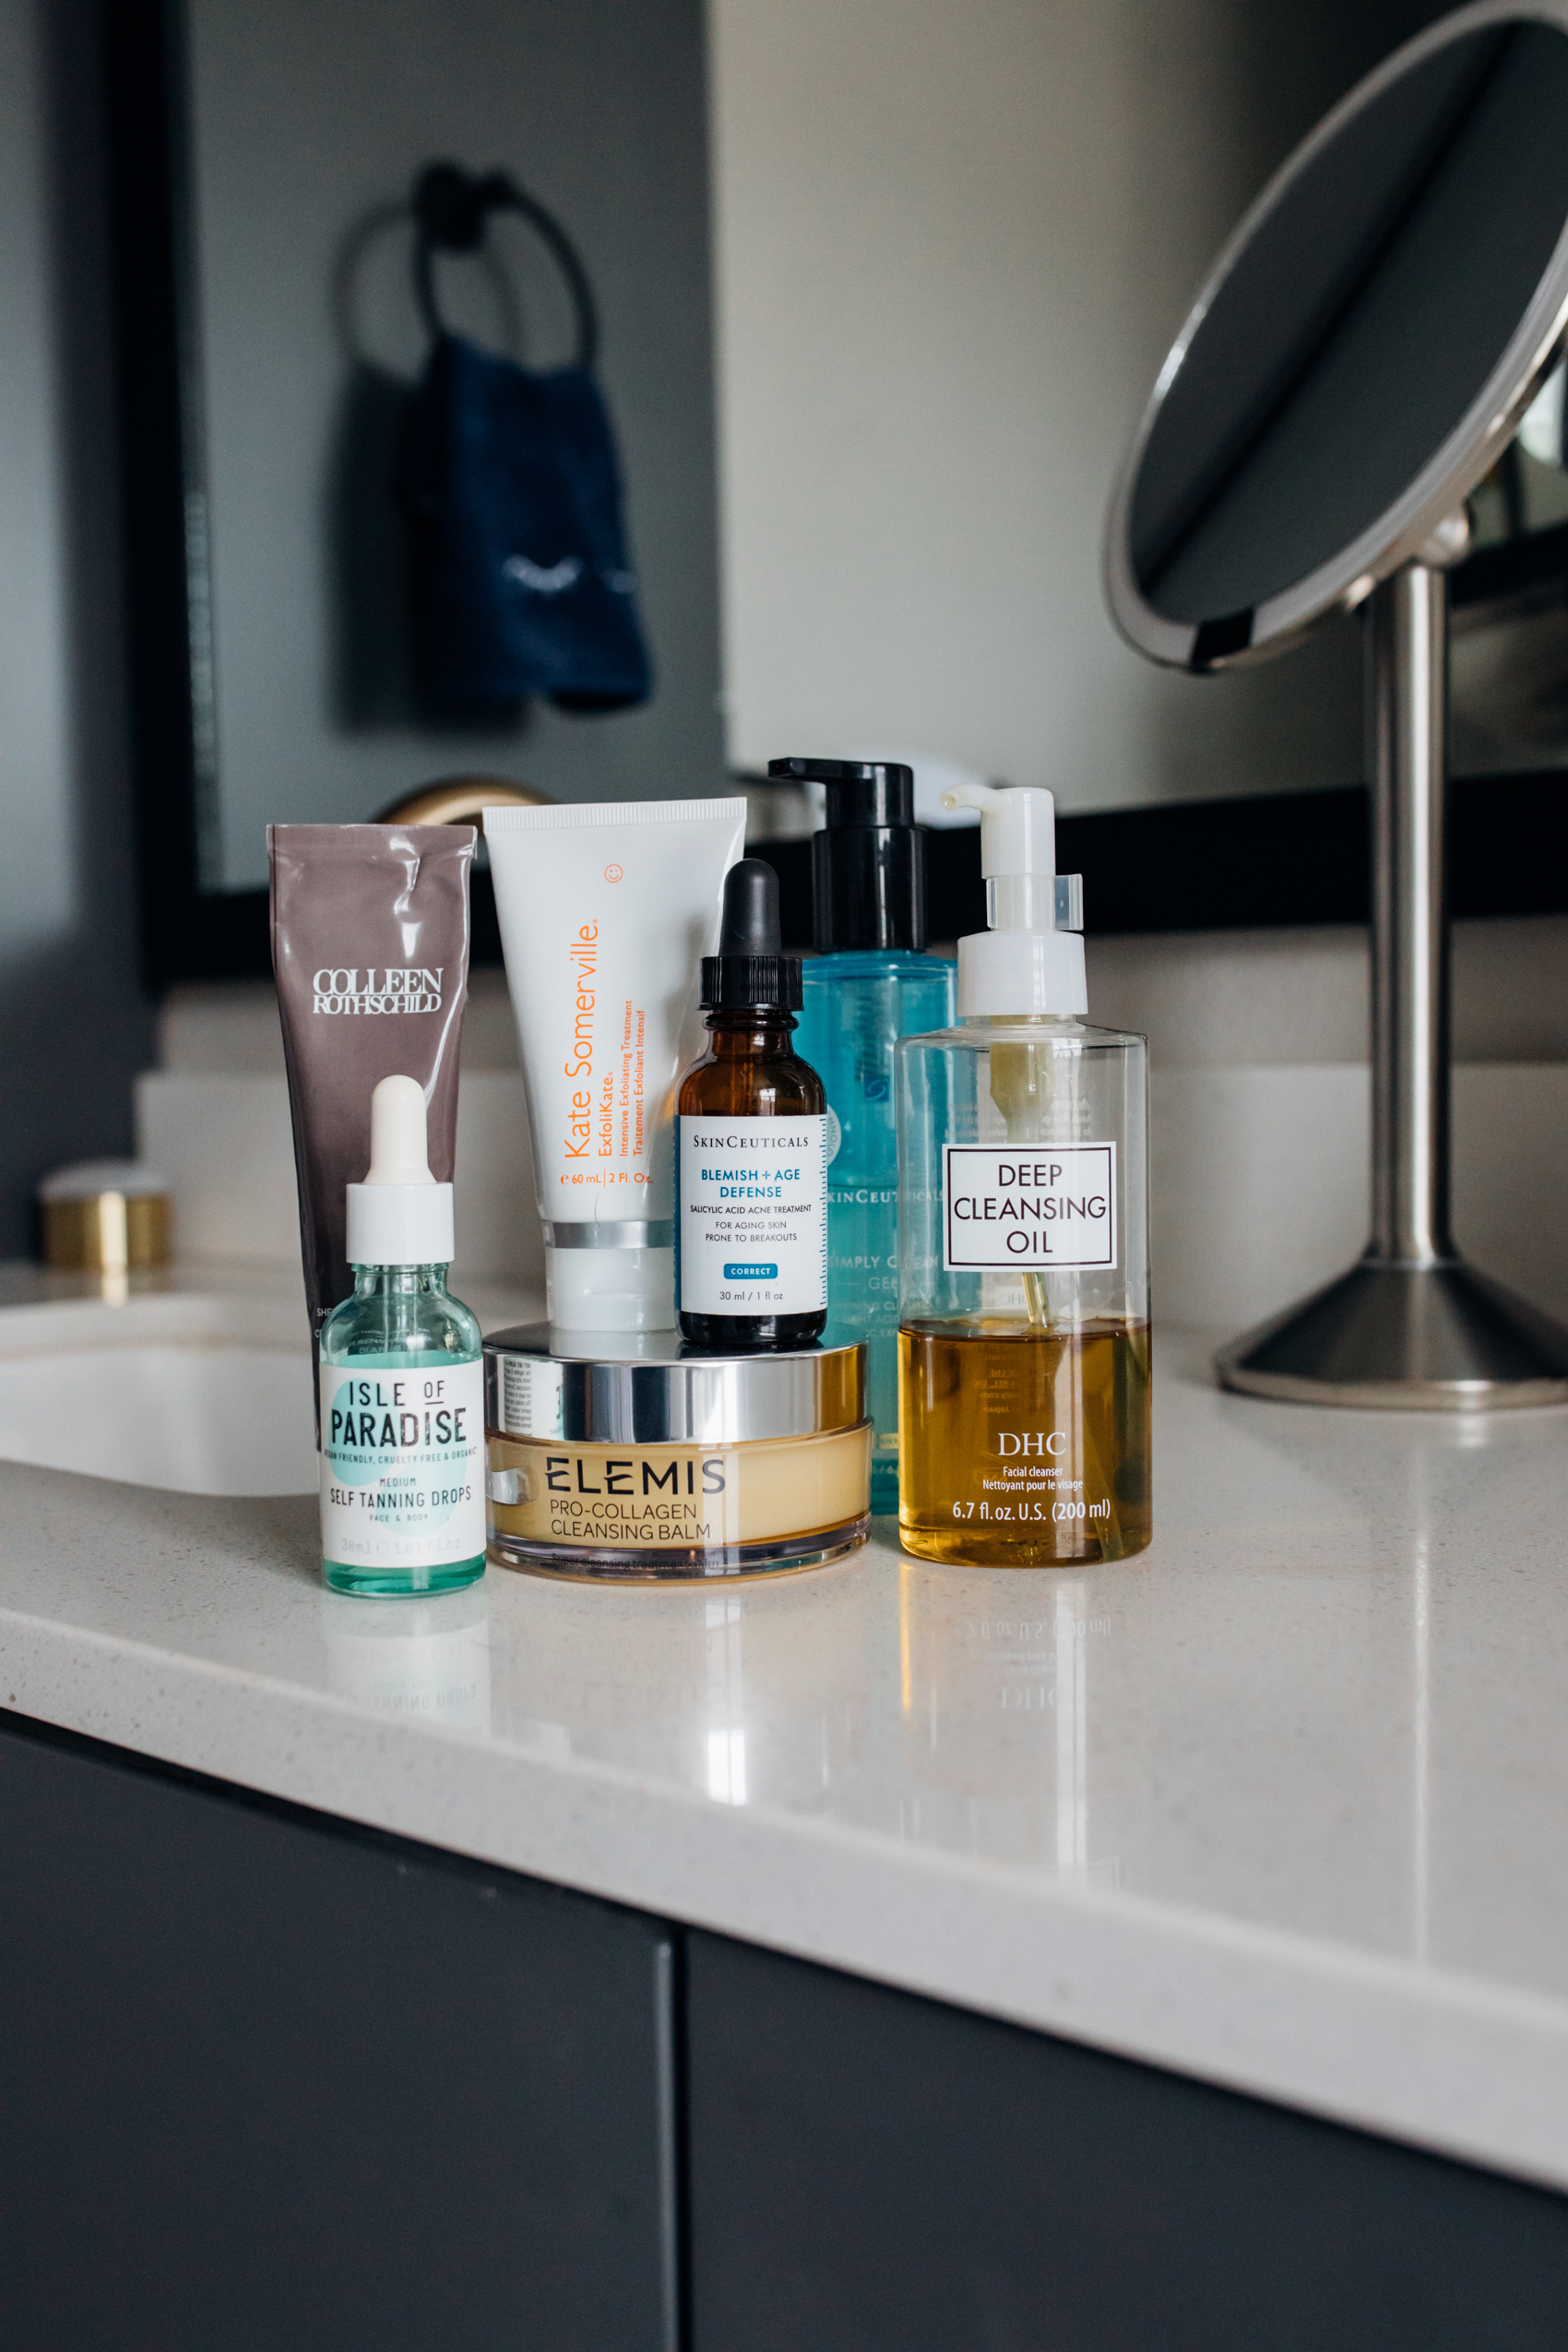 Nighttime skincare routine with Elemis cleansing balm, Skinceuticals blemish + age defense, DHC Cleasing oil, isle of paradise self tanner, Kate sommerville and more